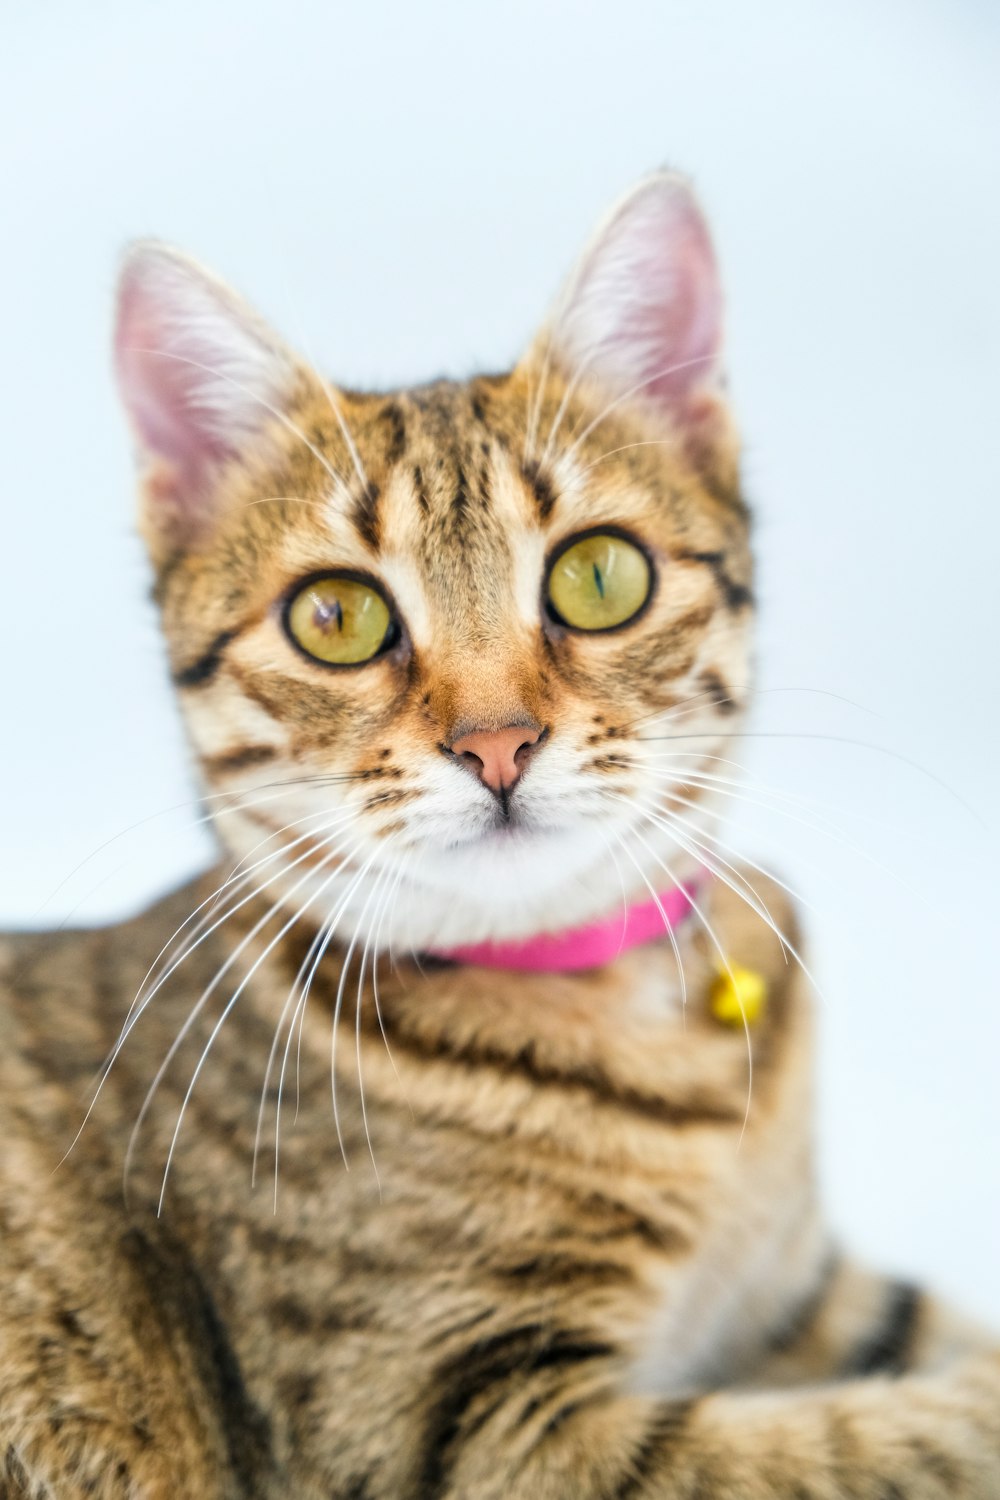 a close up of a cat with a pink collar